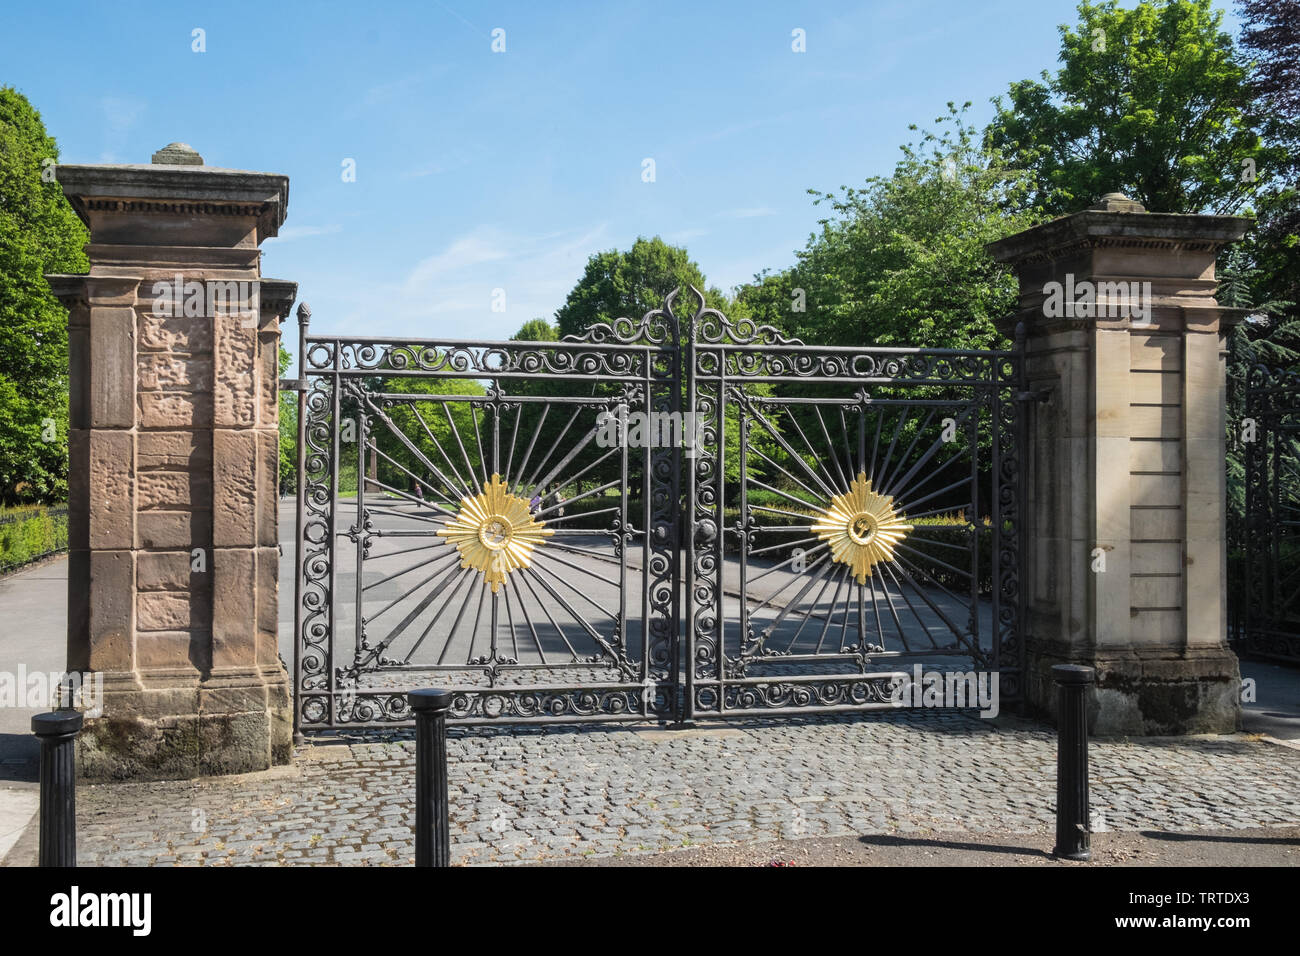 Princess Park,Princes Park,with,large,ornate,gate,entrance,Liverpool 8,Toxteth,Liverpool,Merseyside,Northern,city,England,UK,GB,Great Britain,Europe, Stock Photo